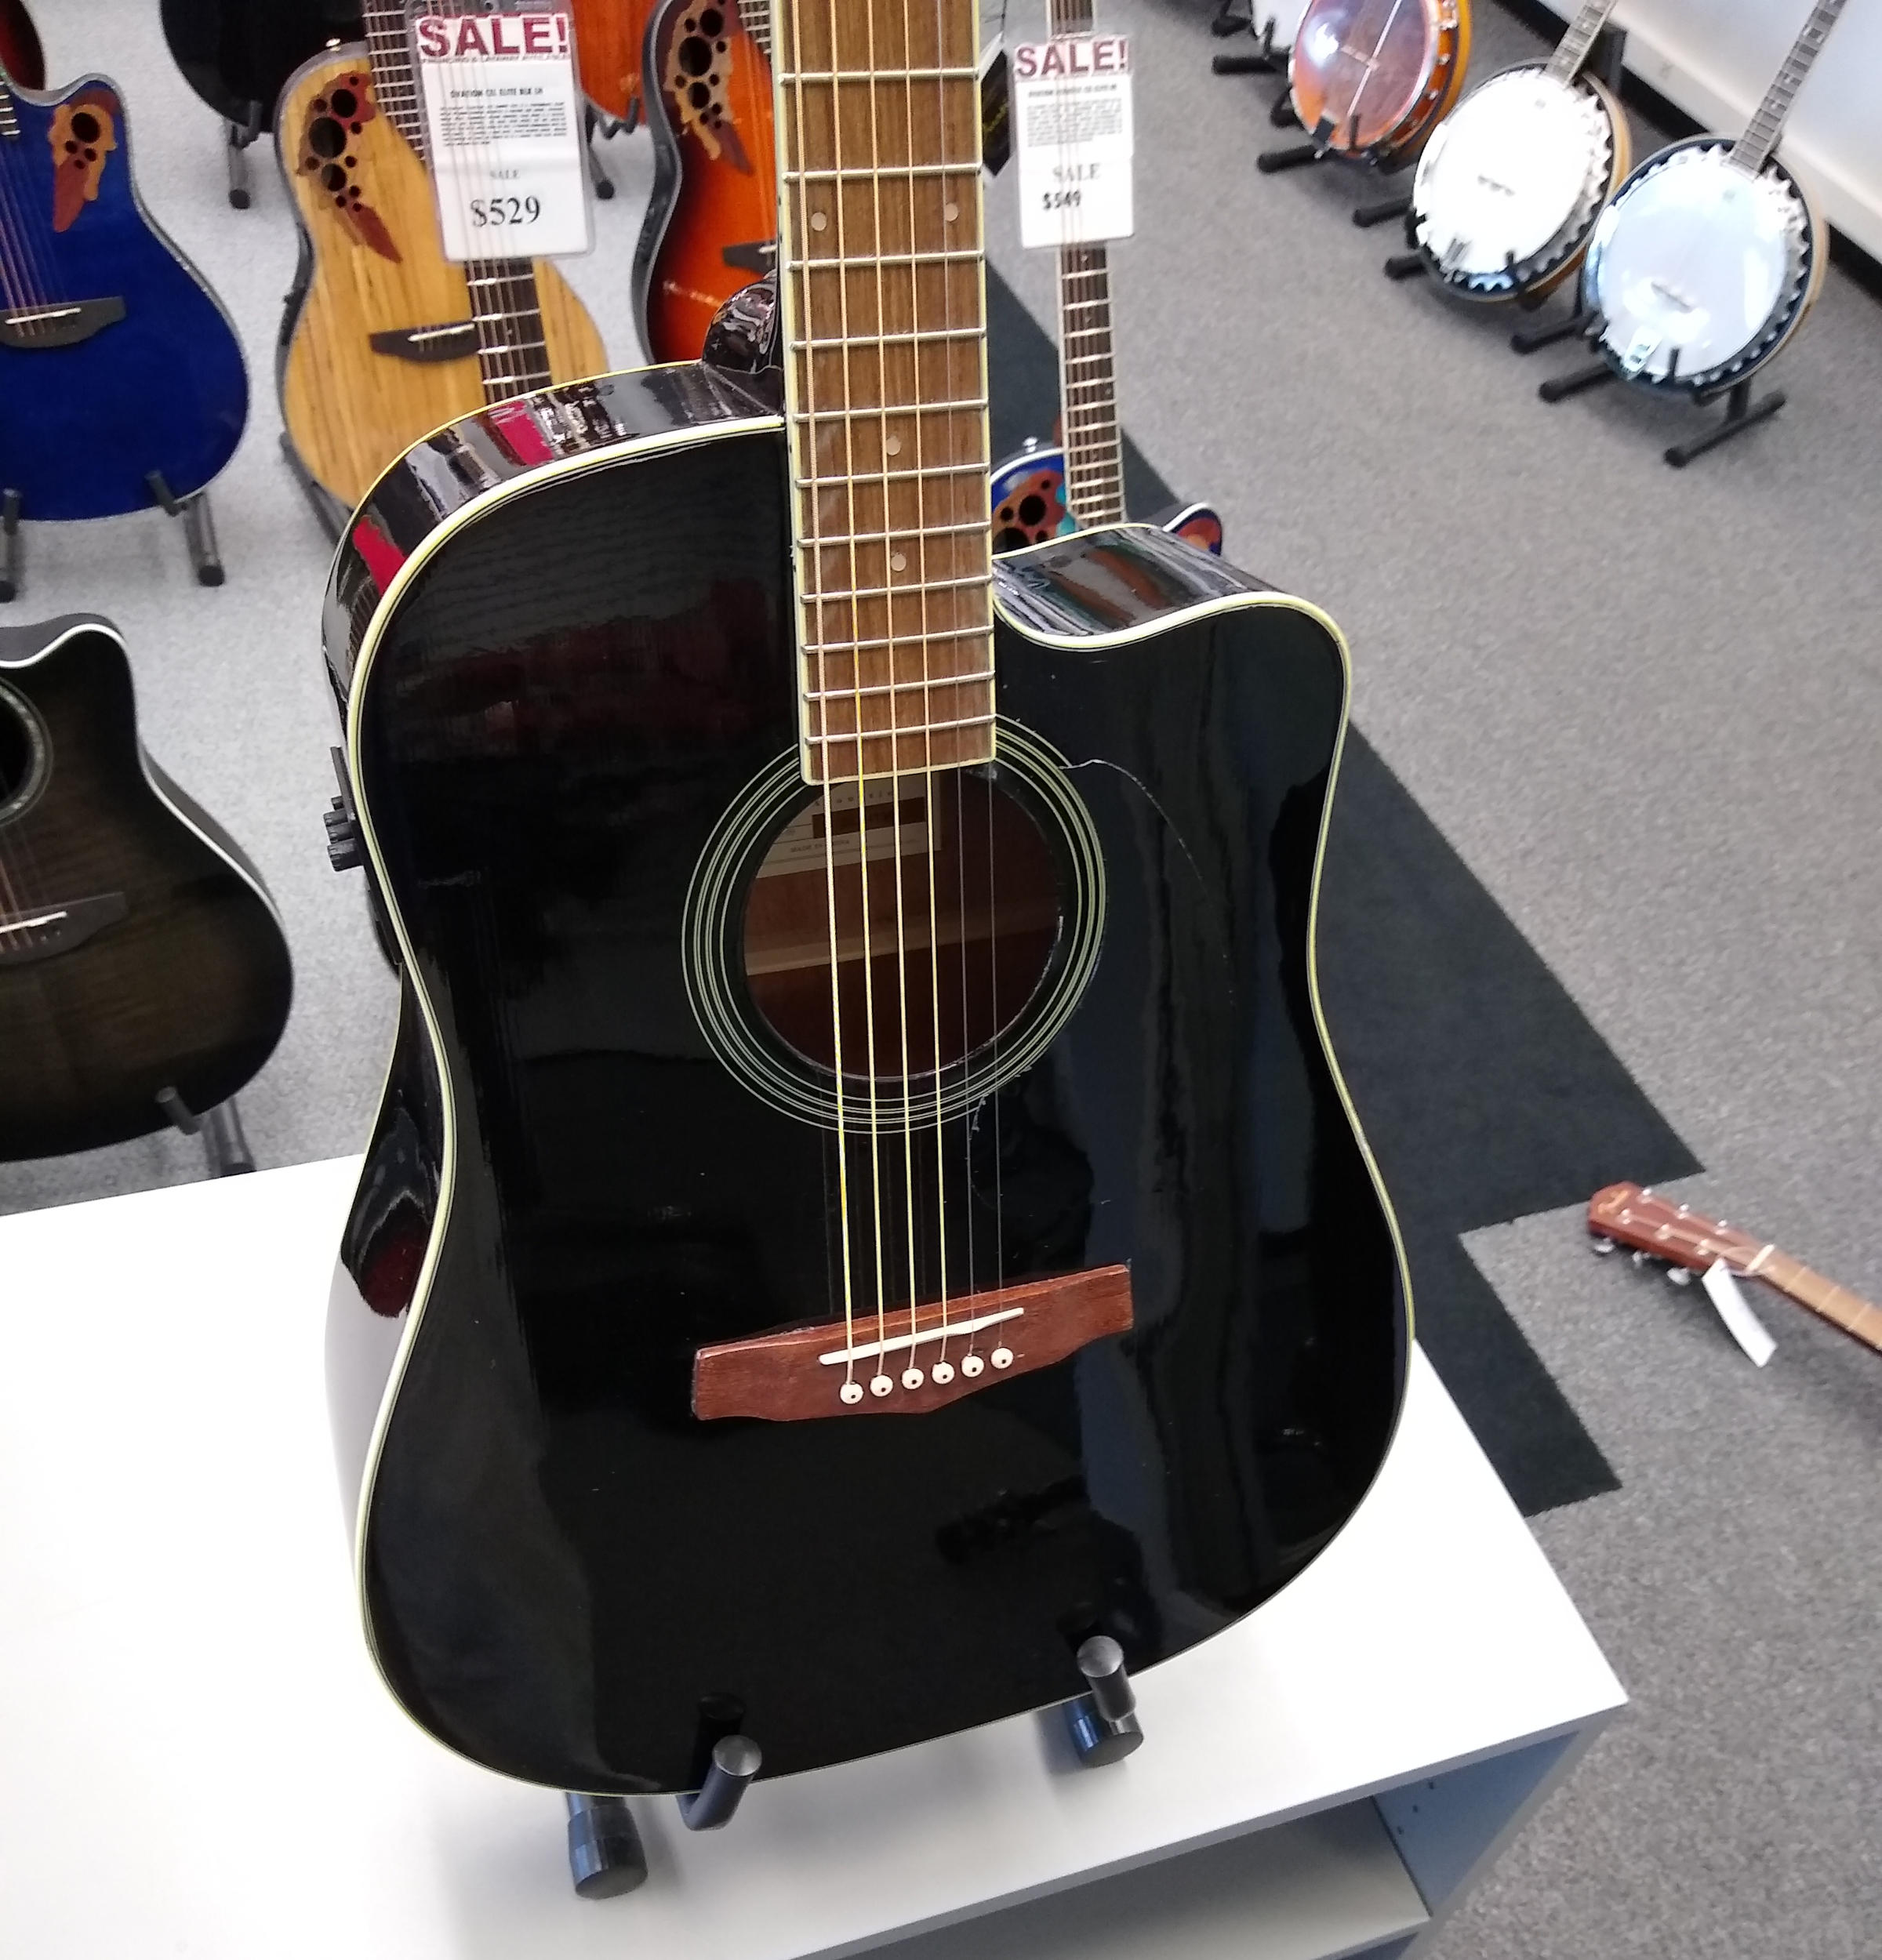 Ibanez Acoustic Electric Guitar